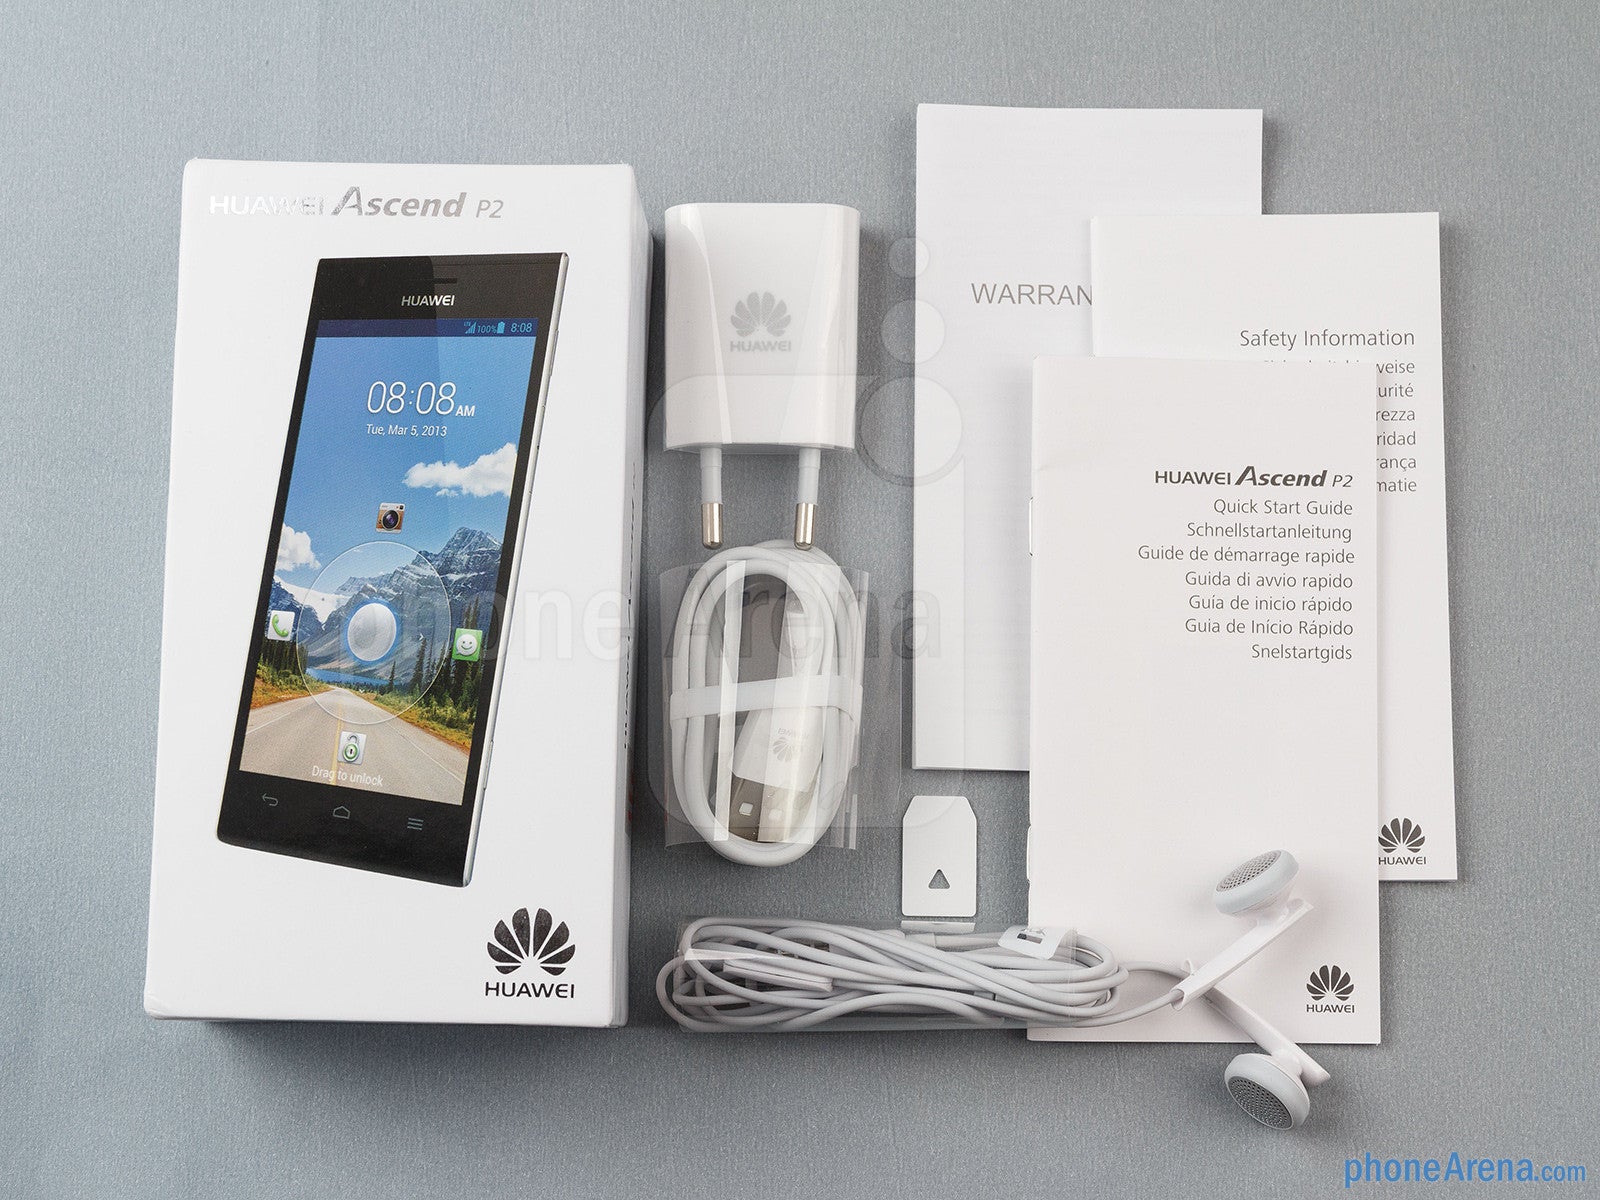 Huawei Ascend P2 Review